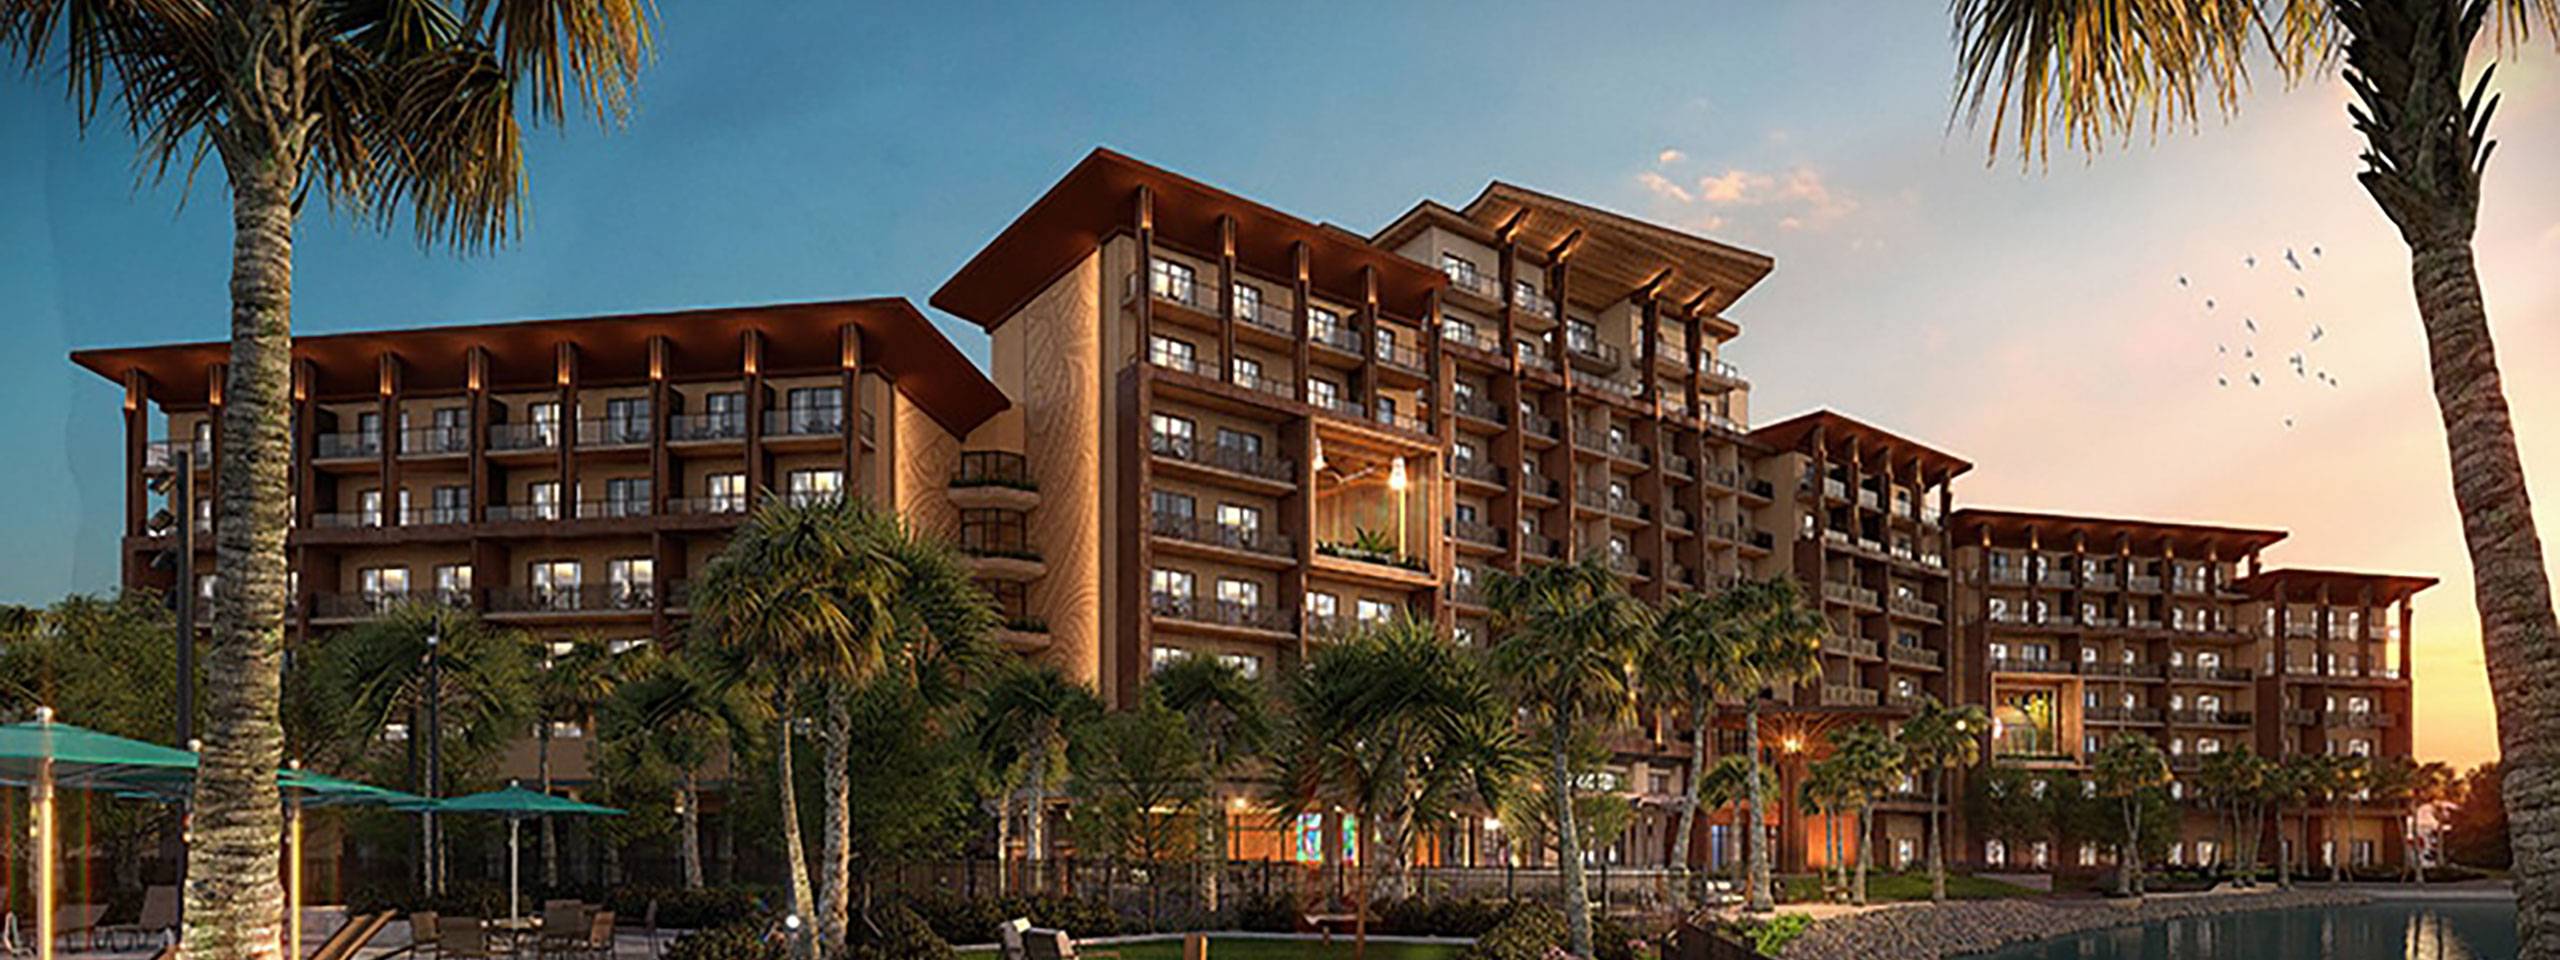 Disney Shares New Details and First Look Inside New Island Tower at Disney's Polynesian Resort